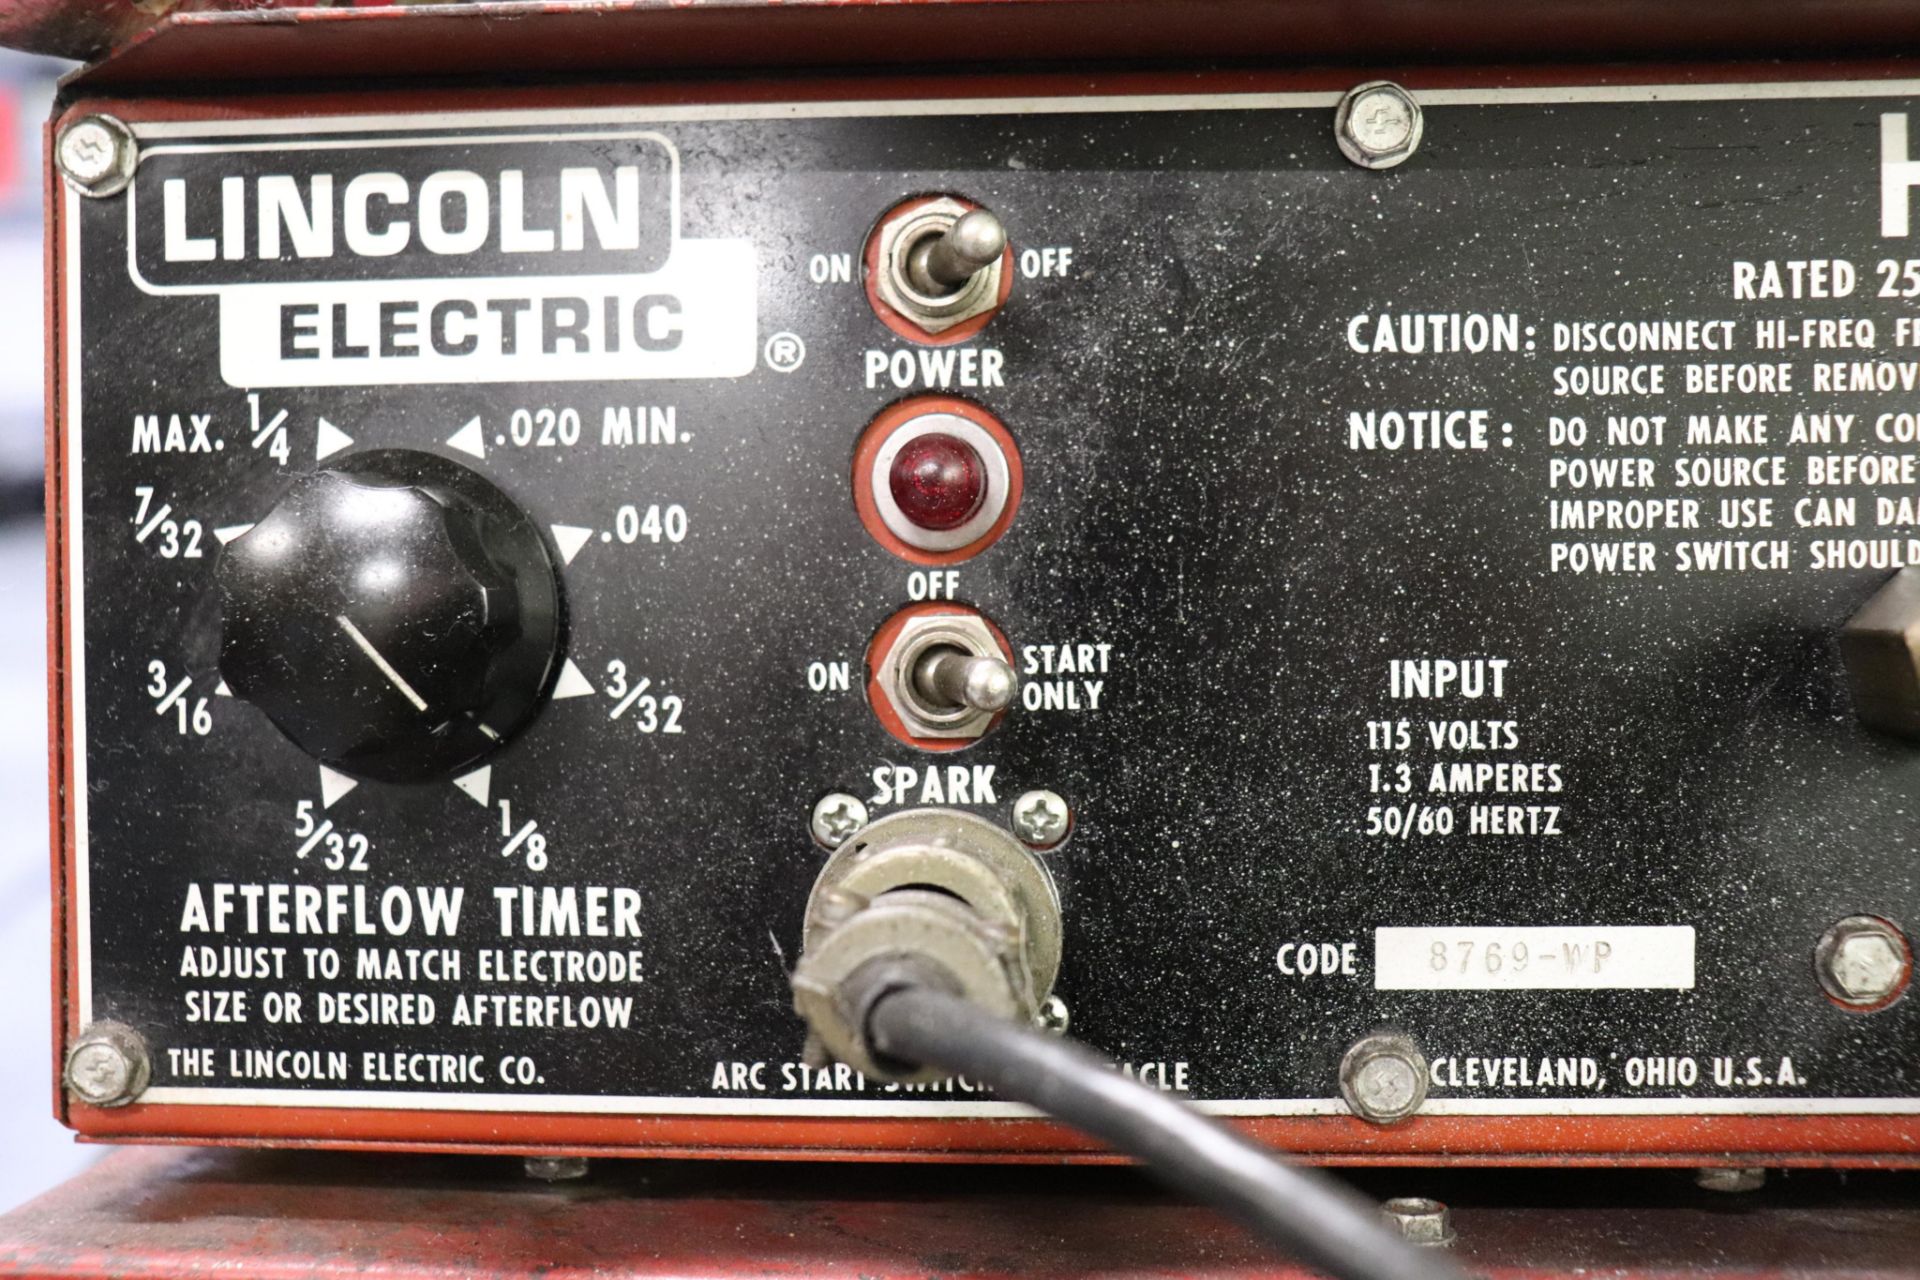 Lincoln Electric 295 amp welder - Image 4 of 5